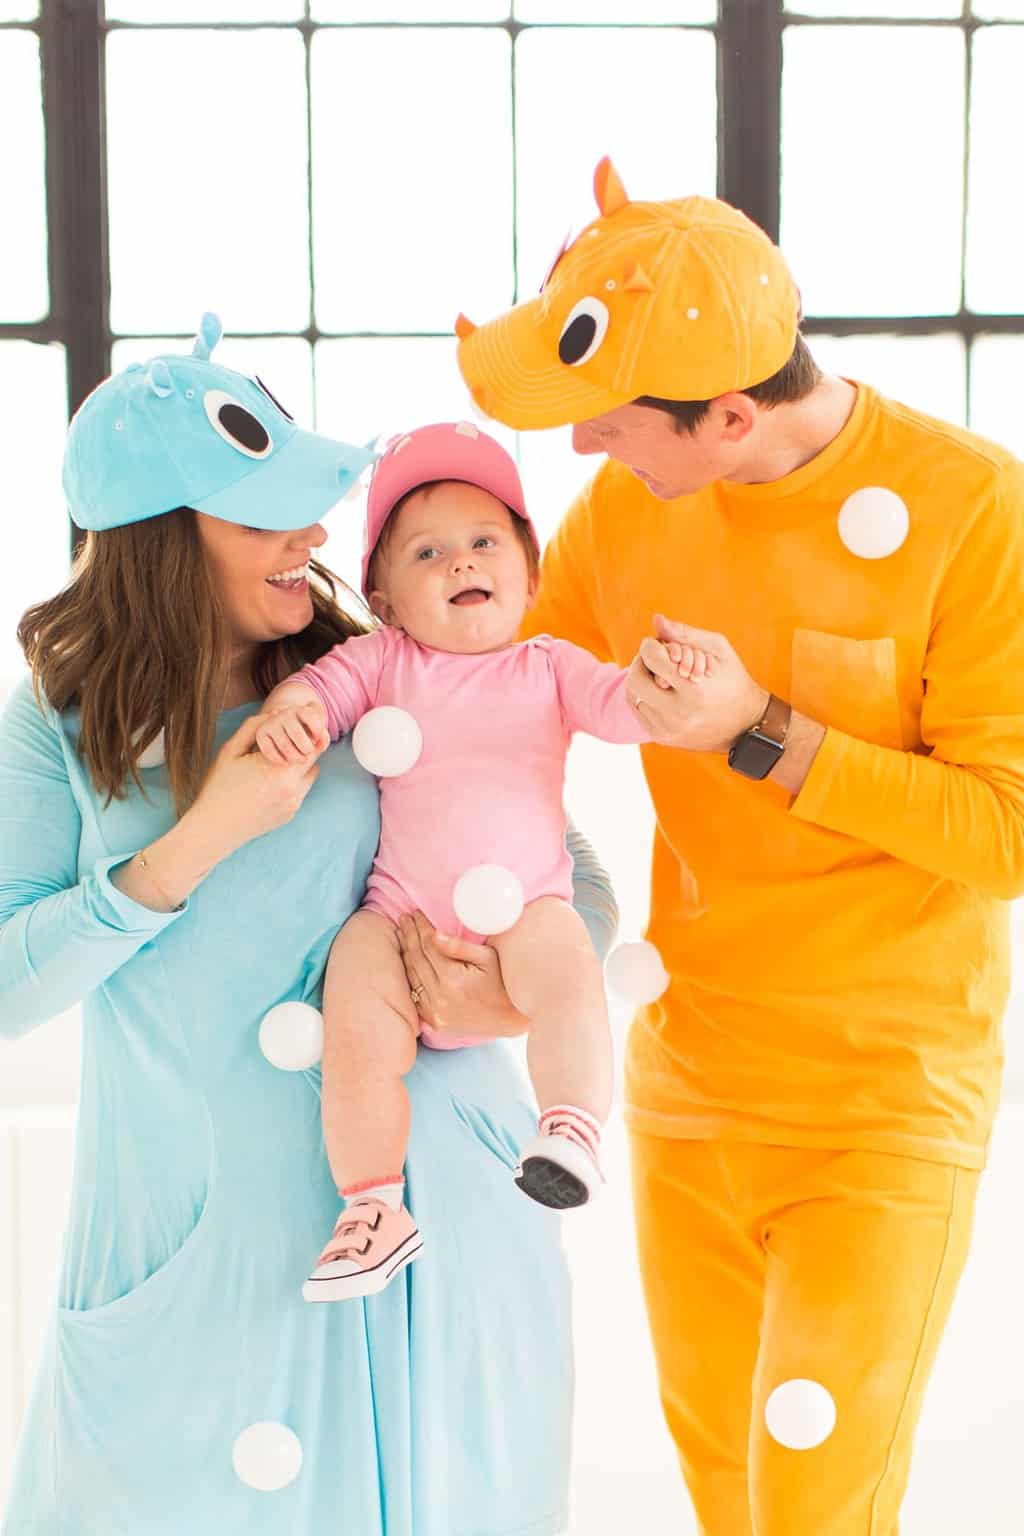 photo of the family in their costumes inspired by the hungry hippo game